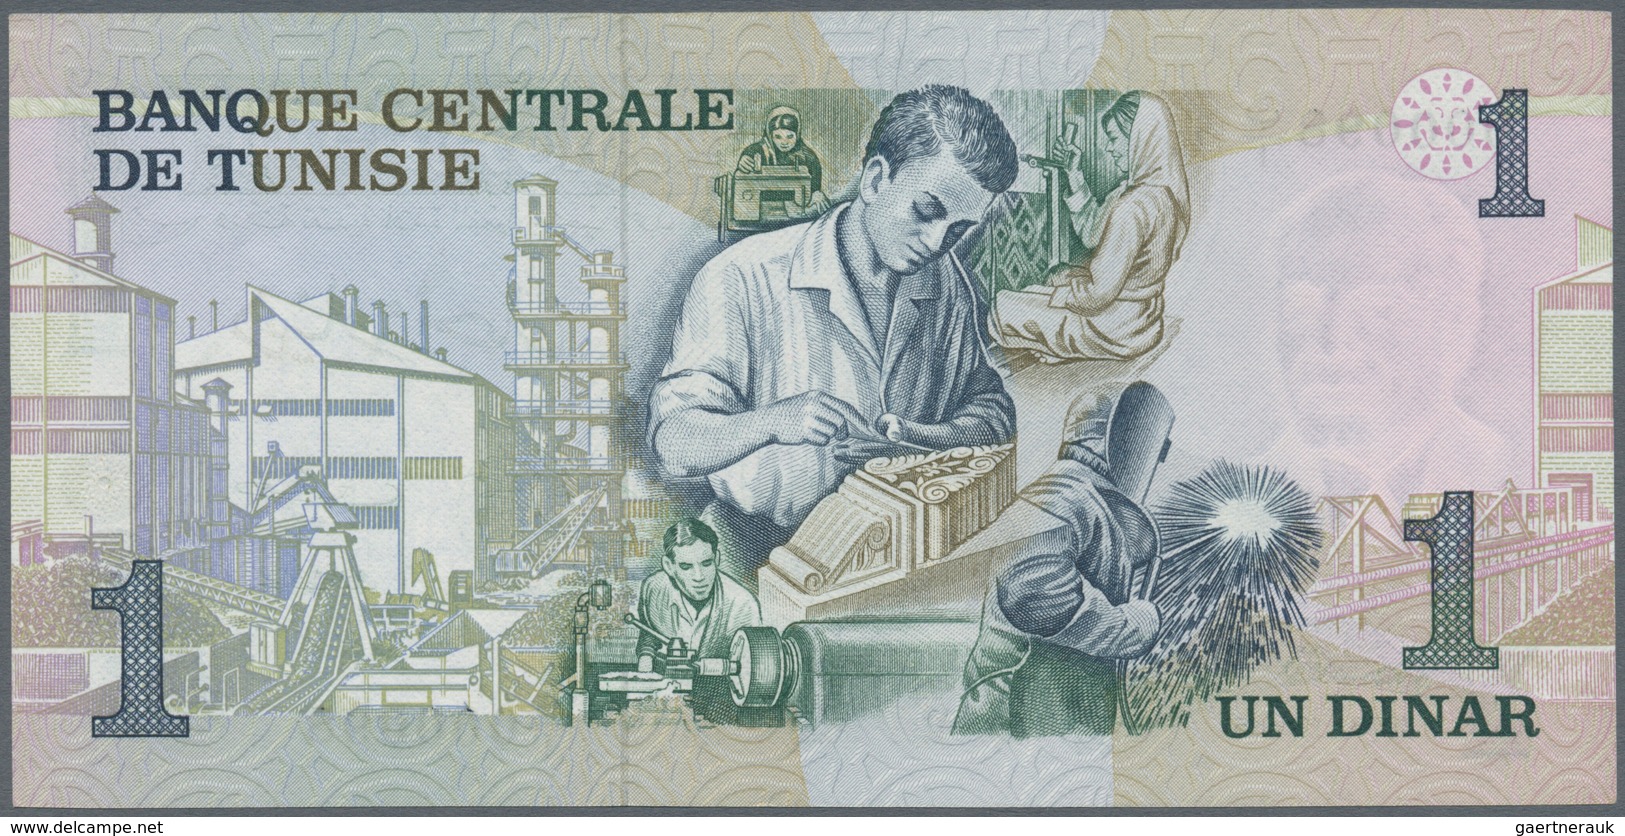 Tunisia / Tunisien: 1 Dinar 1973 P. 70, Very Rare With Very Low Serial Number A/1 000098, Banknote F - Tusesië